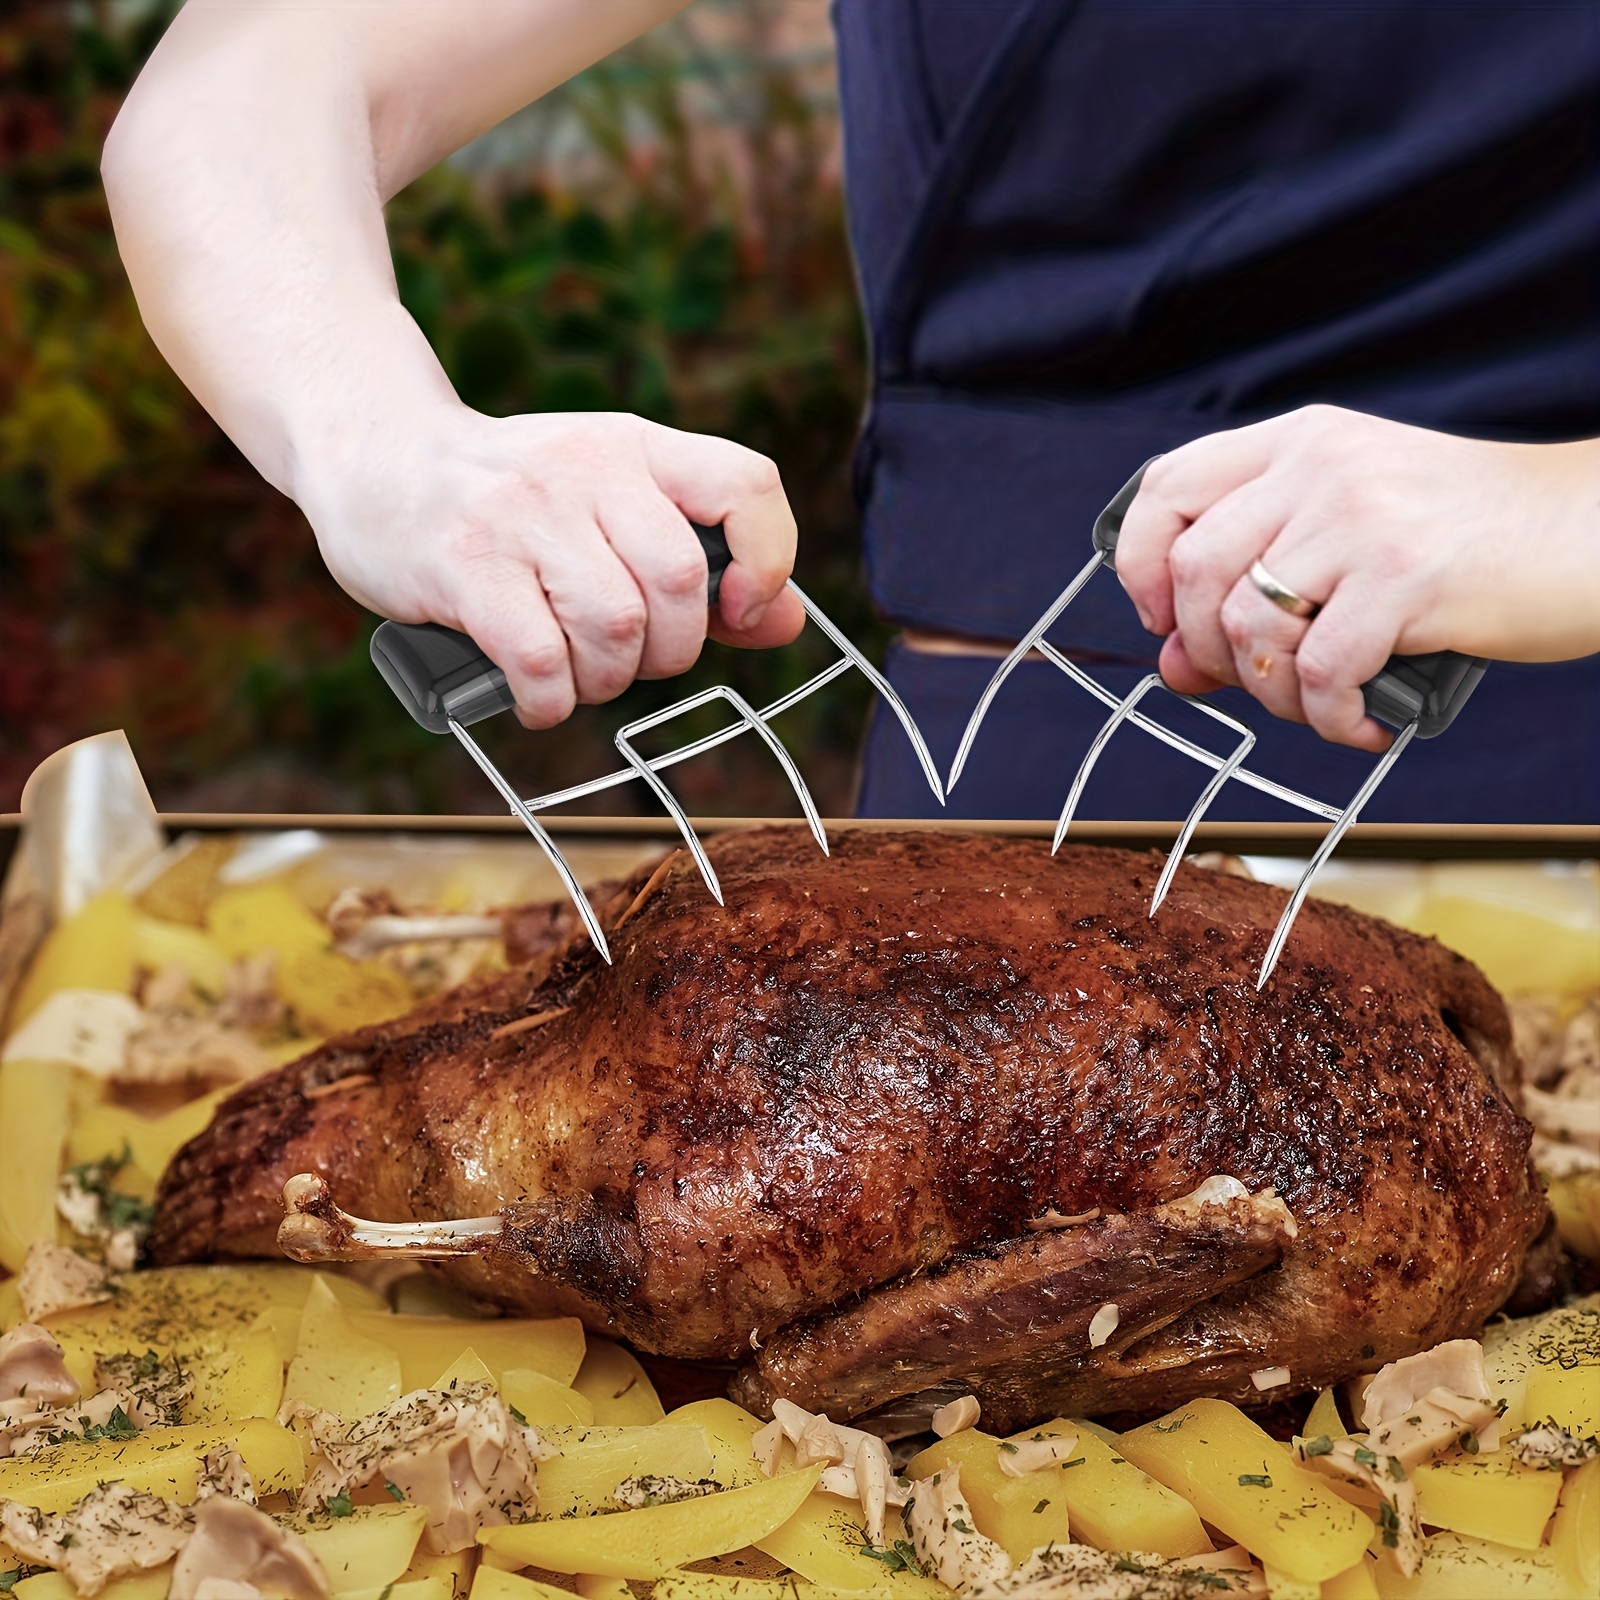 EZ Shredding Claws Stainless Steel Bear Claw Meat Shredders for BBQ. Perfect for Shredding Pulled Pork, Poultry or Just